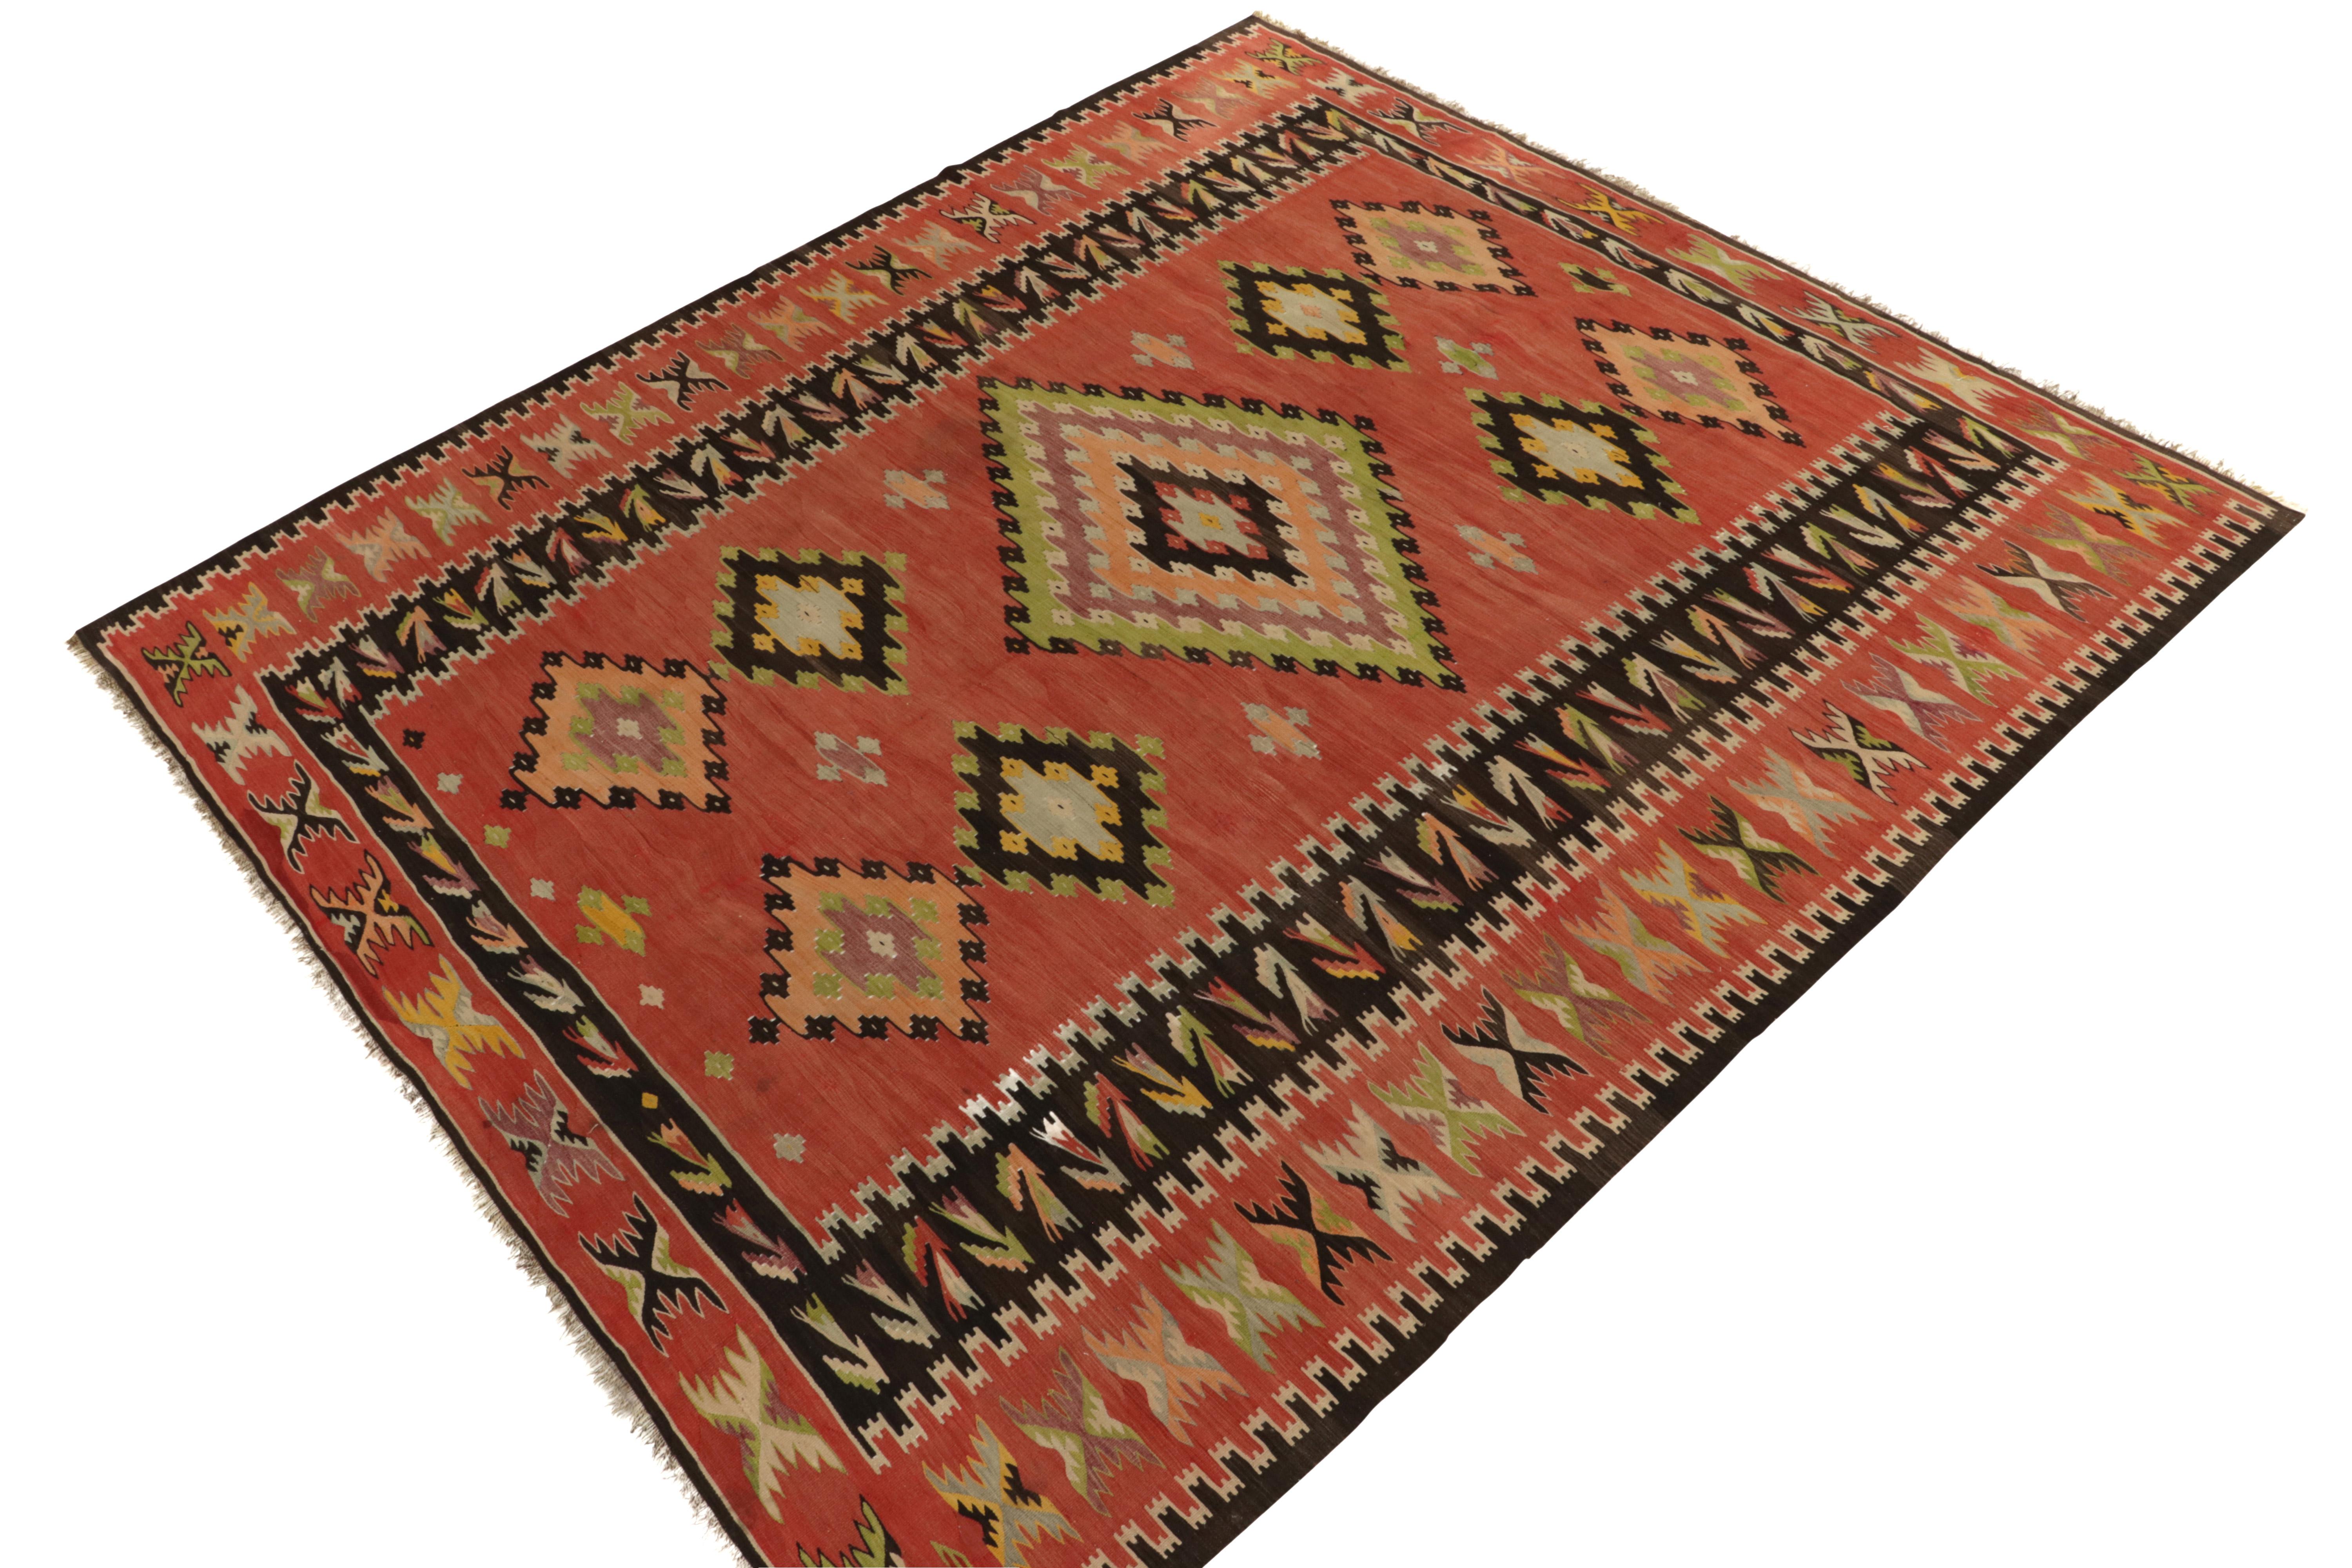 Handwoven in wool originating from Turkey circa 1950-1960, a brilliant 9x11 vintage Kilim rug of outstanding large-size and color. 

On the Design: Among its many accolades, few mid-century flat weaves of this provenance can be found in this